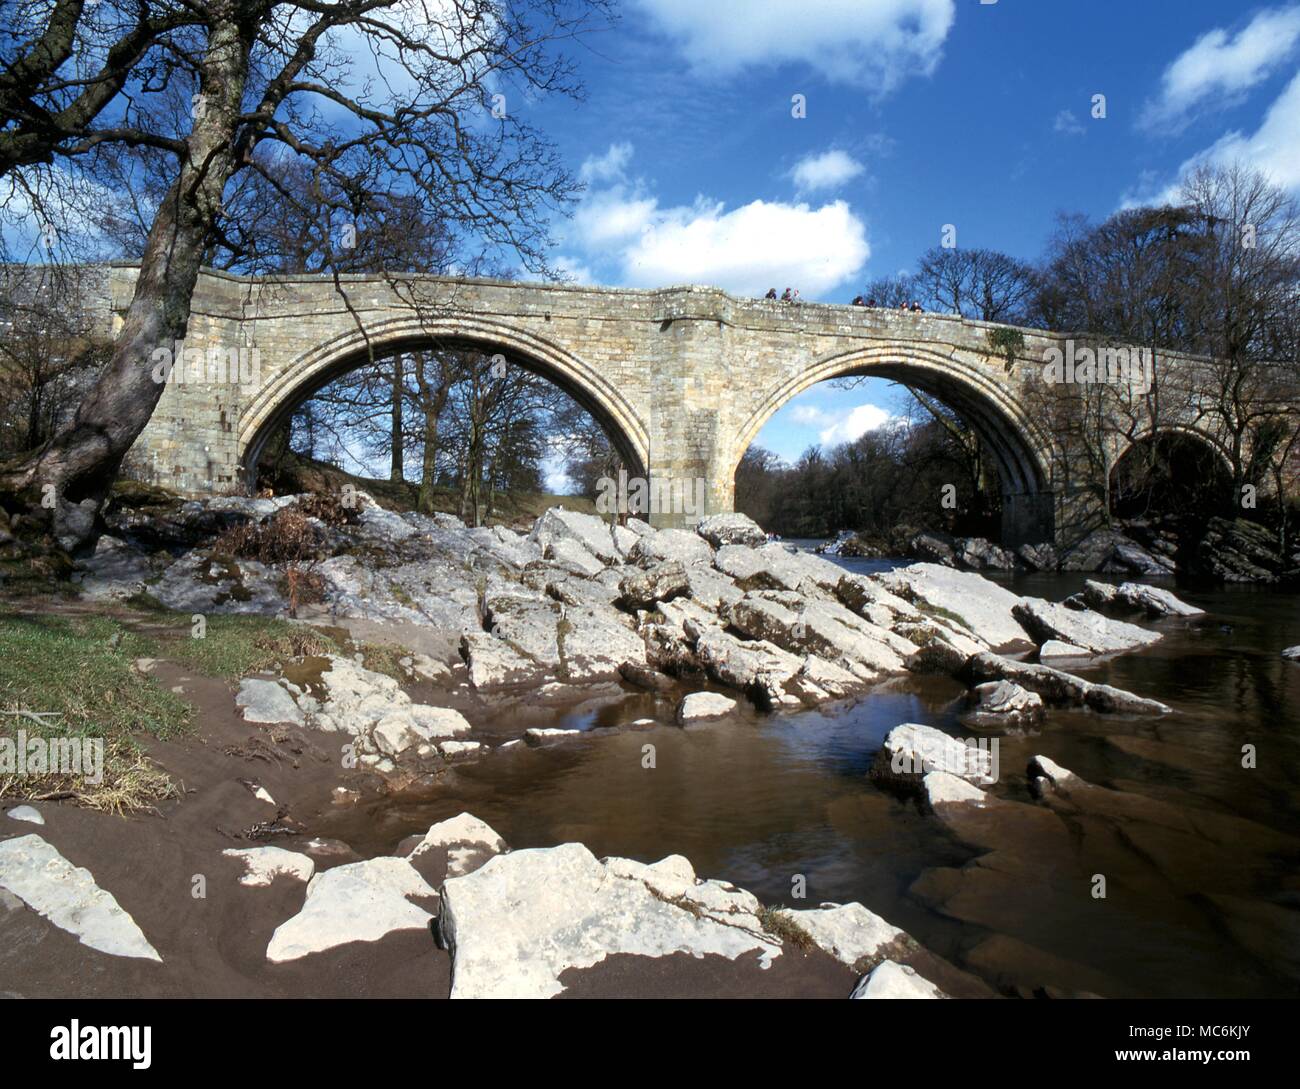 Haunted places. Kirkby Lonsdale. The medieval bridge is said to be haunted by a dog. Some link the bridge with legends of the Devil, so the locals call it 'Devil's Dyke''.' Stock Photo